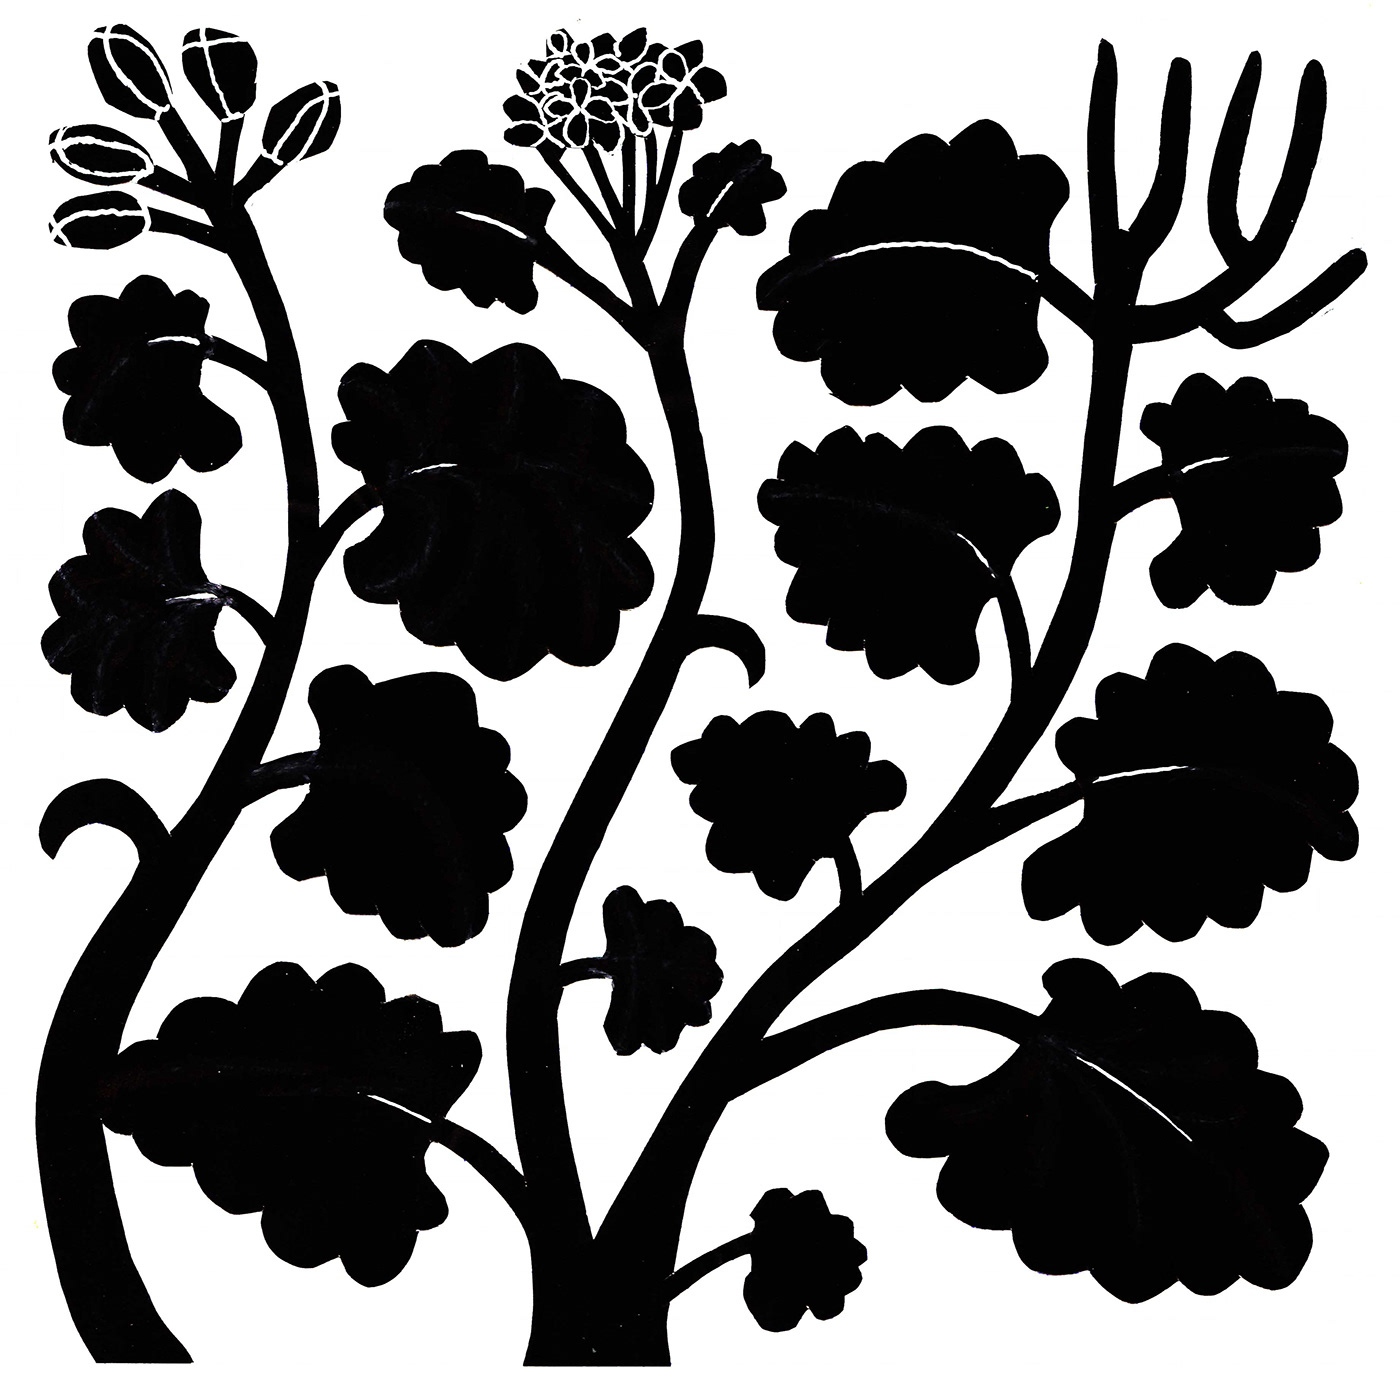 Flowers plants botanical bold graphic black Silhouette weeds floral garden